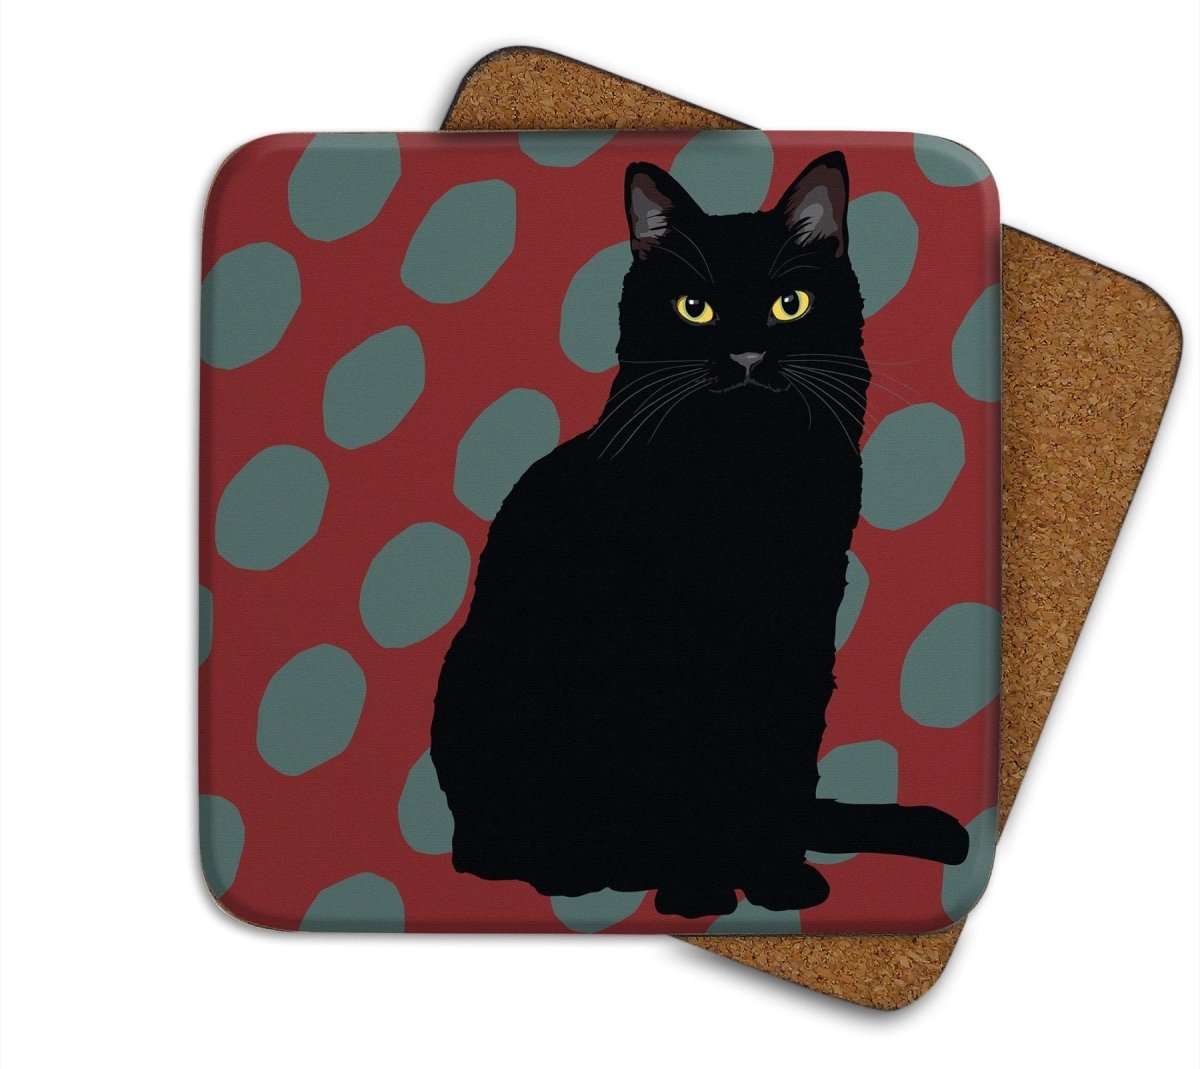 Cats Coaster Set by Leslie Gerry, Set of 4